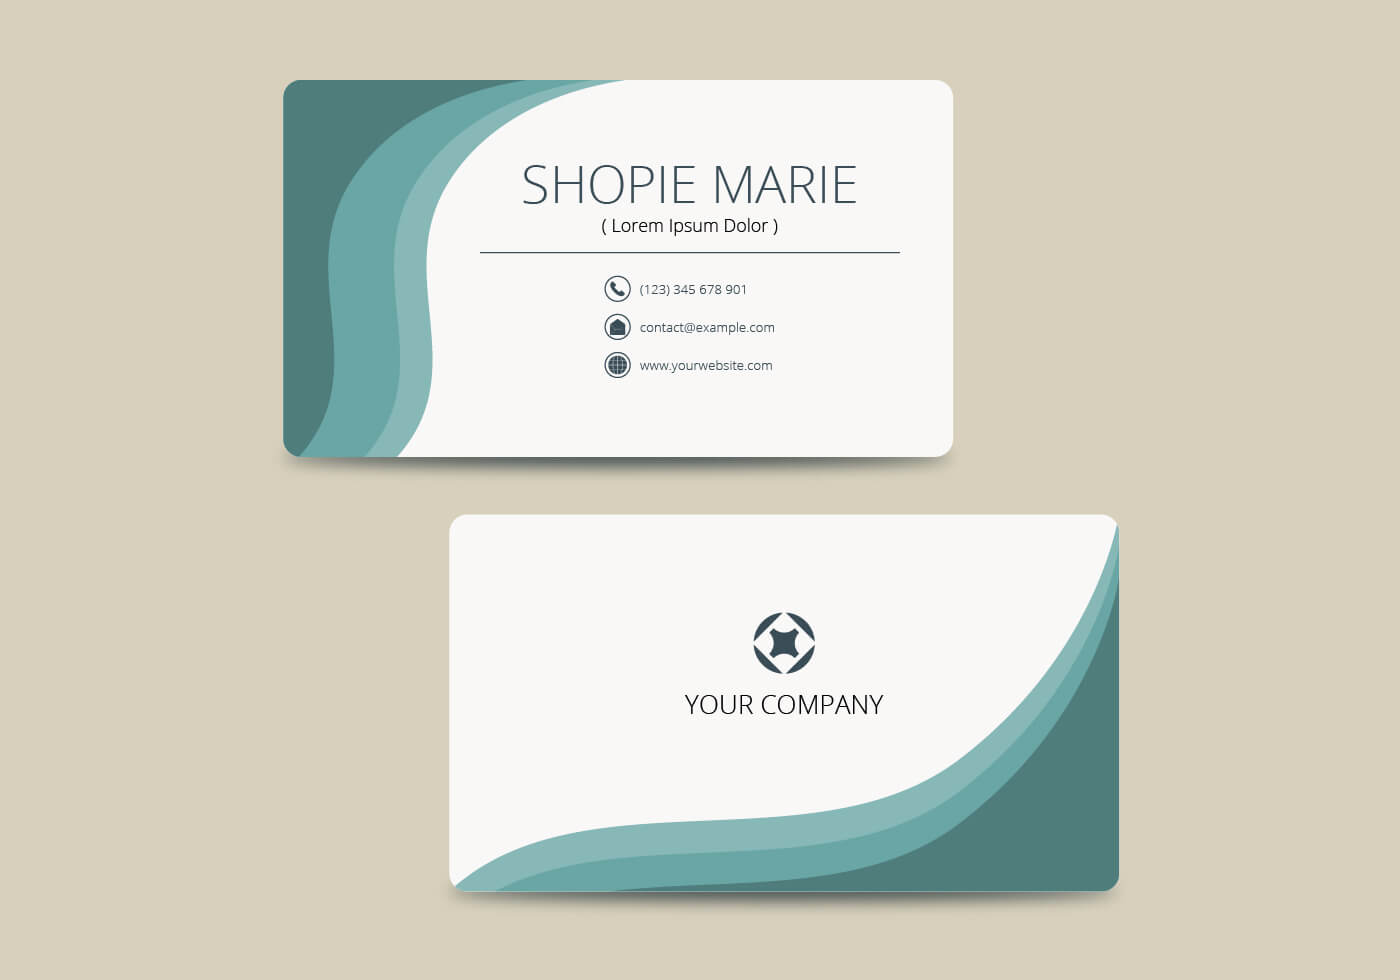 Teal Business Card Template Vector – Download Free Vectors With Regard To Buisness Card Template